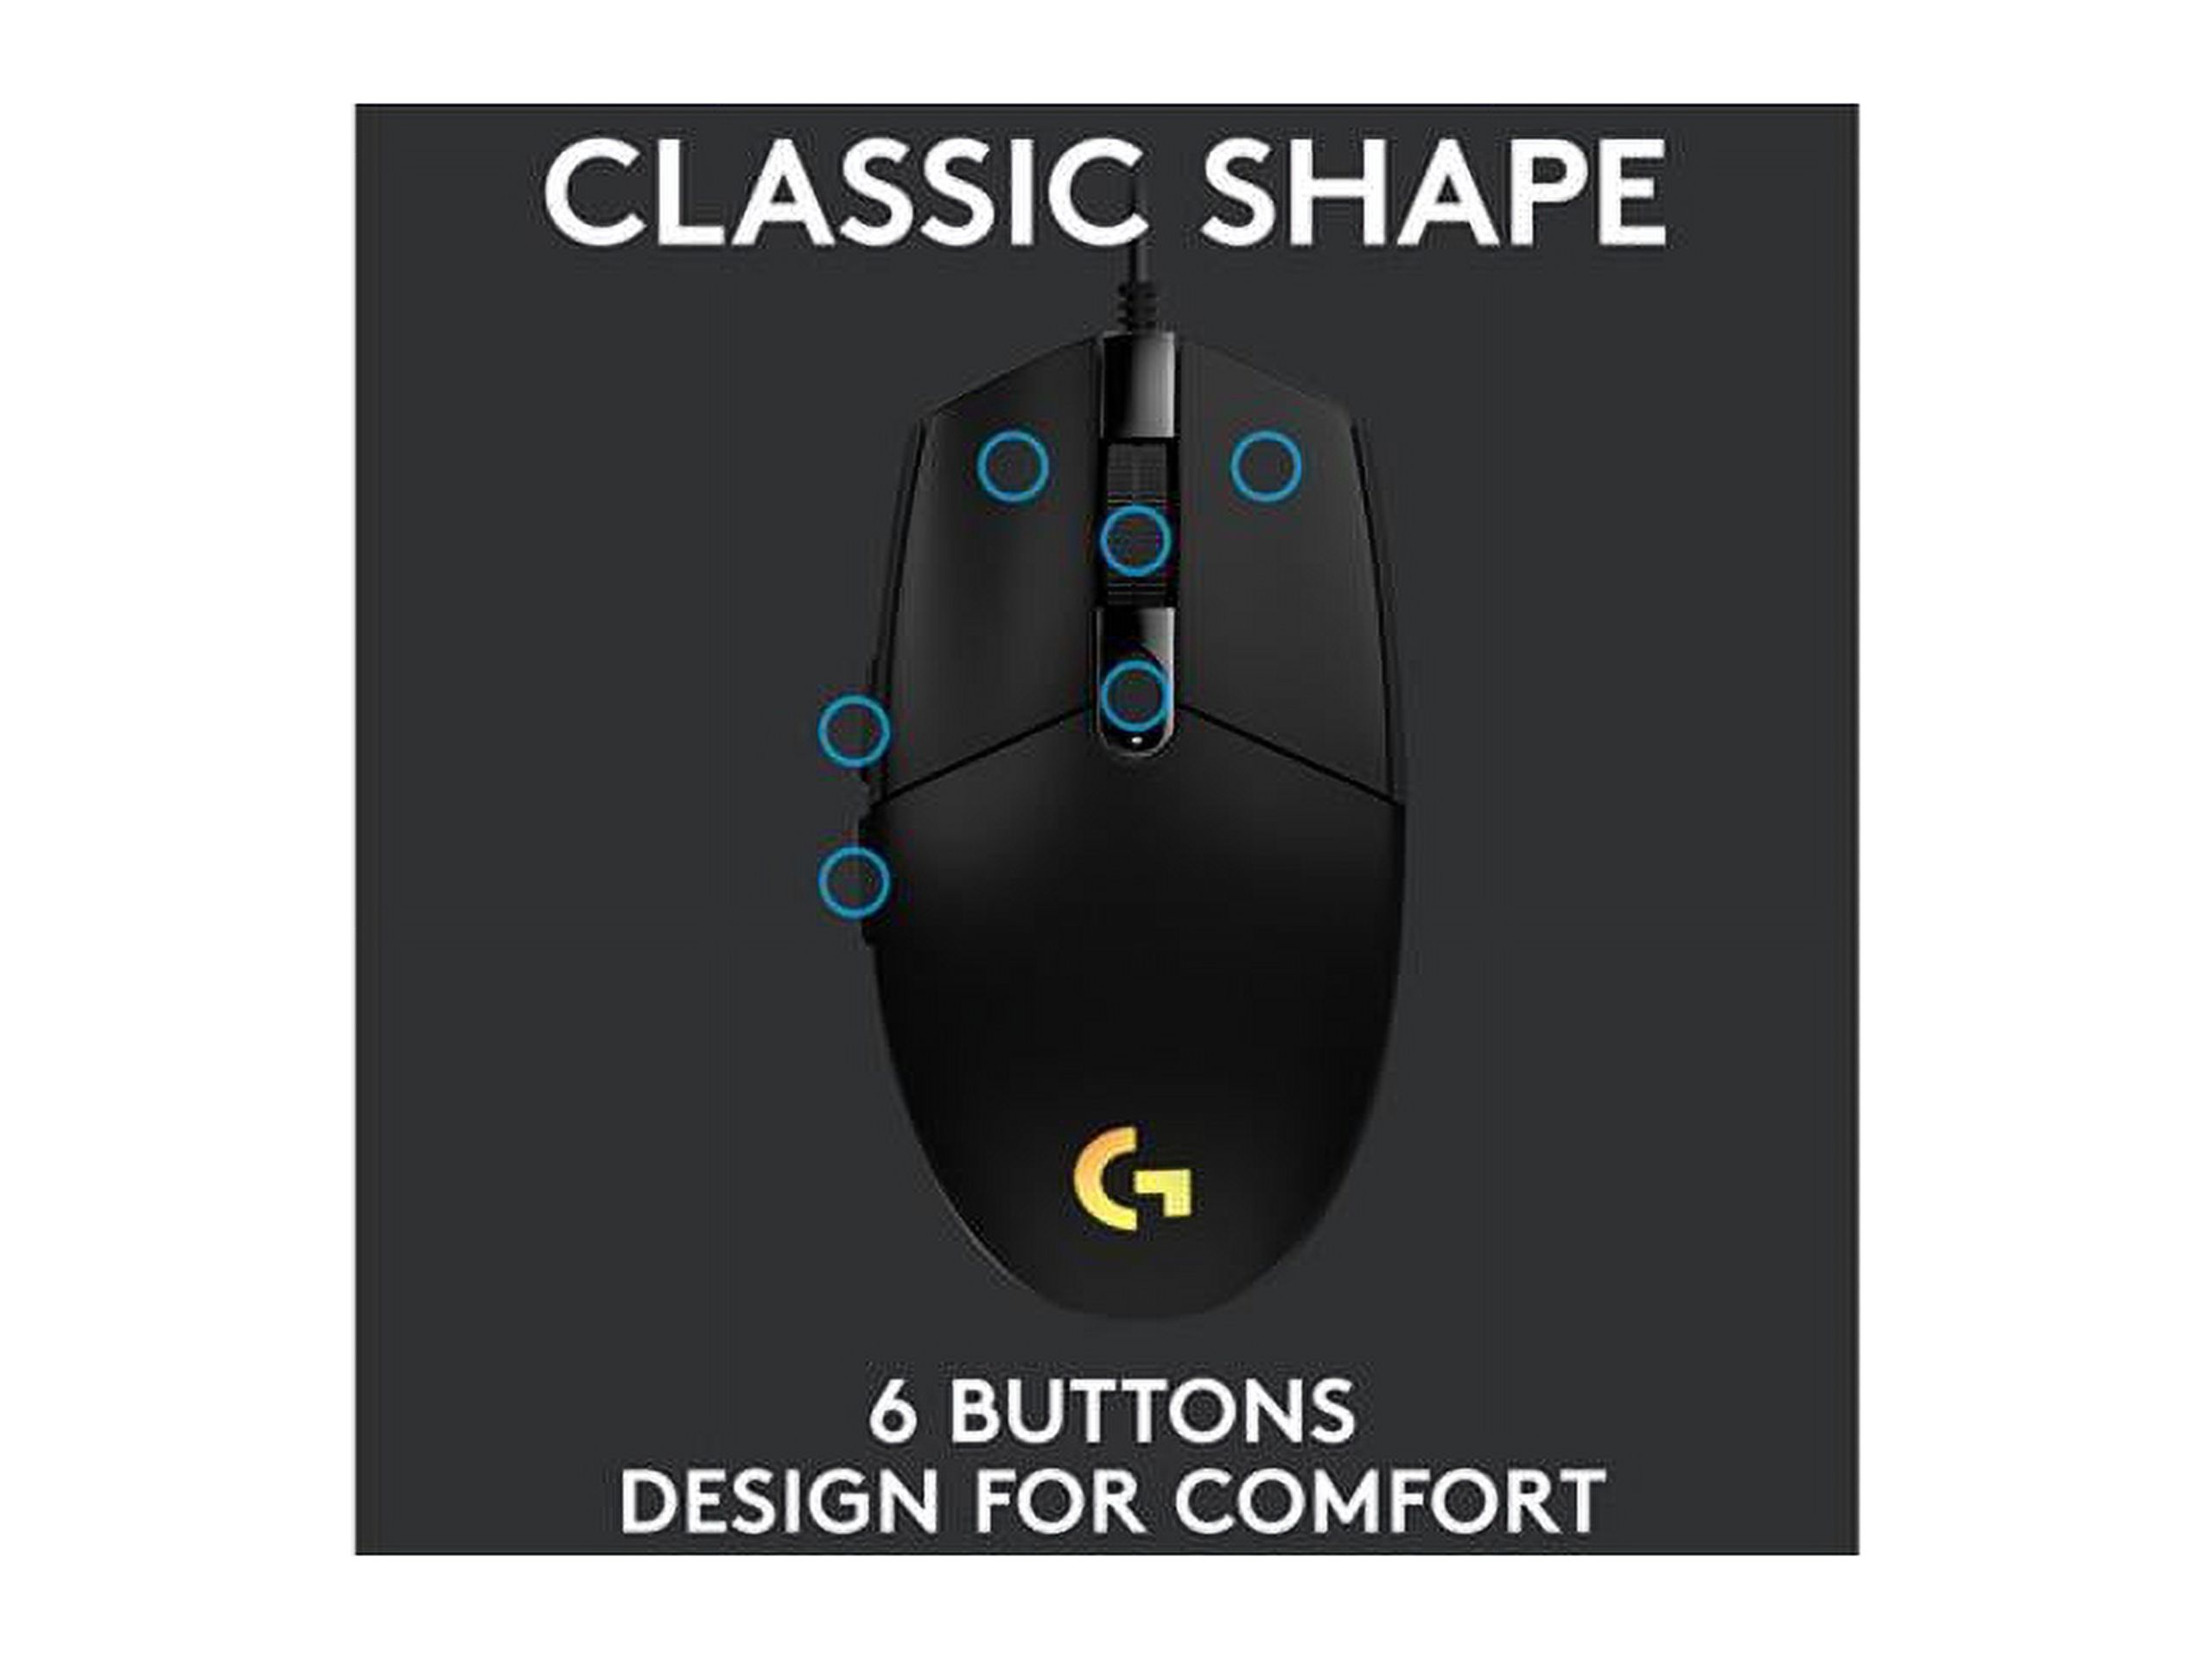 Logitech G203 Wired Gaming Mouse, 8,000 DPI, Rainbow Optical Effect LIGHTSYNC RGB, 6 Programmable Buttons, On-Board Memory, Screen Mapping, PC/Mac Computer and Laptop Compatible - Black - image 5 of 7